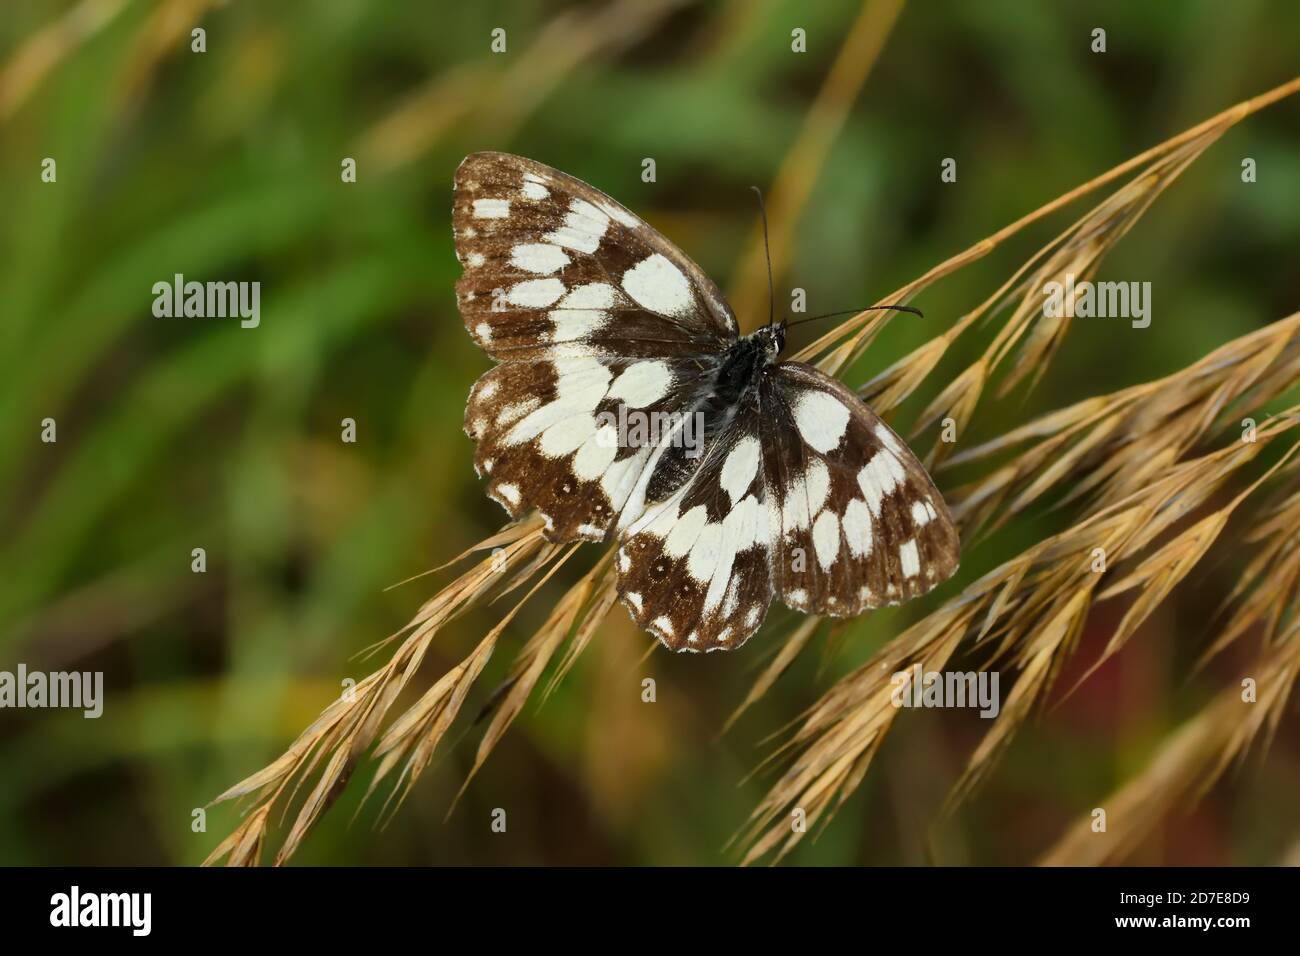 Macro photograph of the butterfly of the Marbled white species (Melanargia galathea) resting on flowers of the warm season. Stock Photo